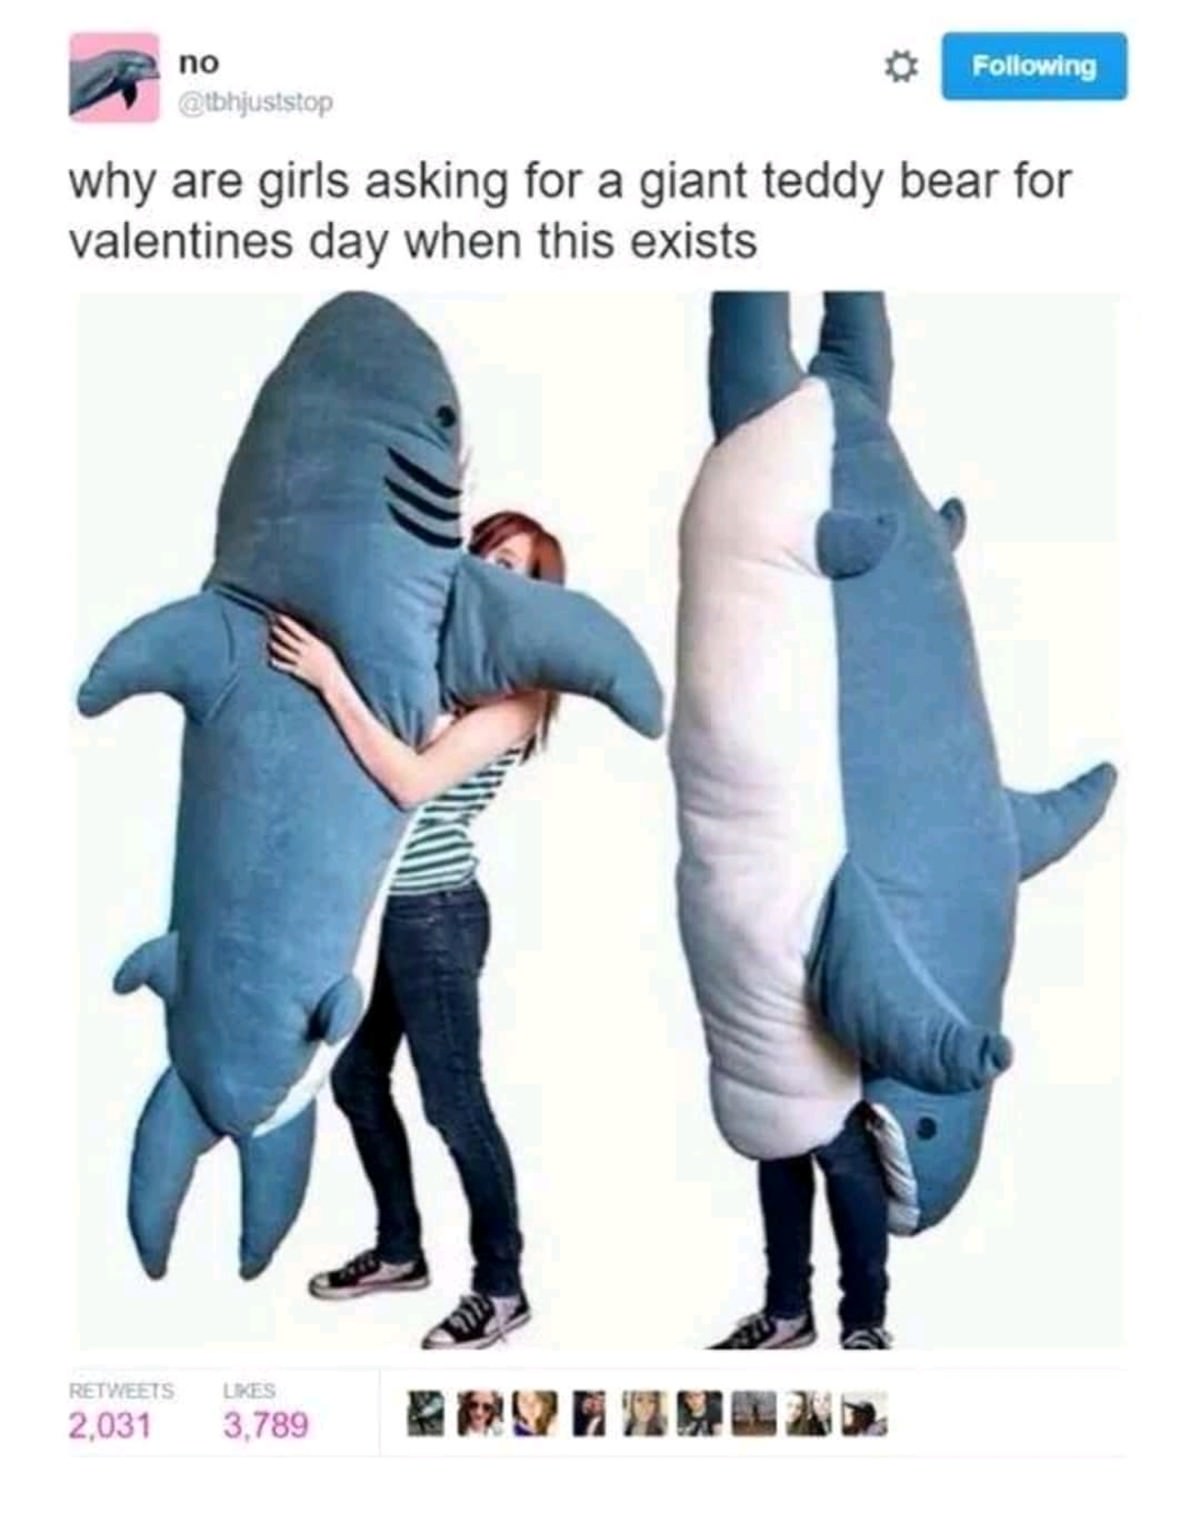 giant shark plush - ing no why are girls asking for a giant teddy bear for valentines day when this exists 2,03 3,789 29